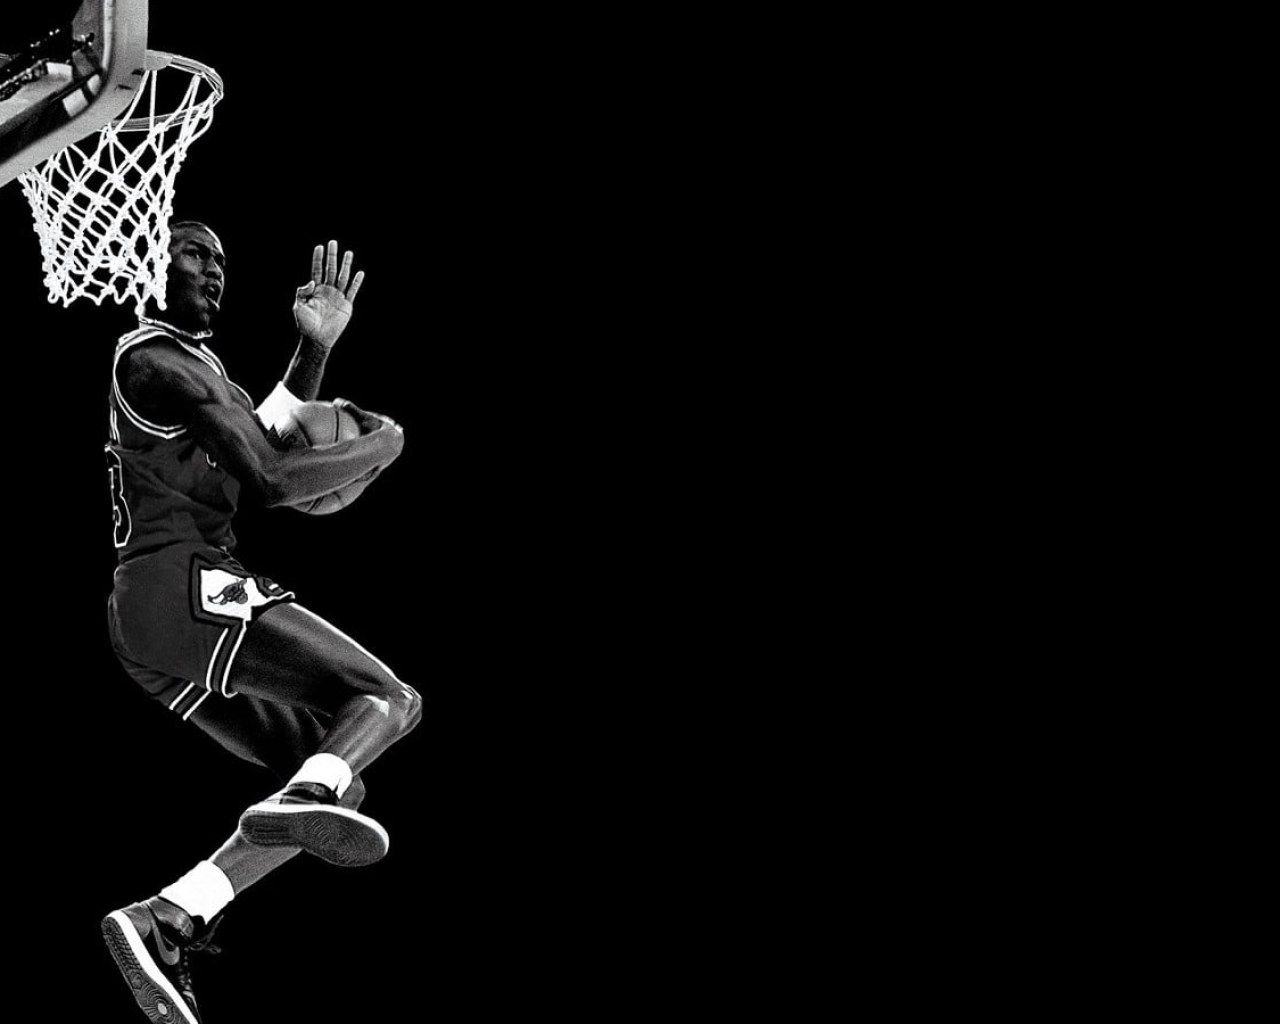 A black and white photo of person jumping for the basketball - NBA, basketball